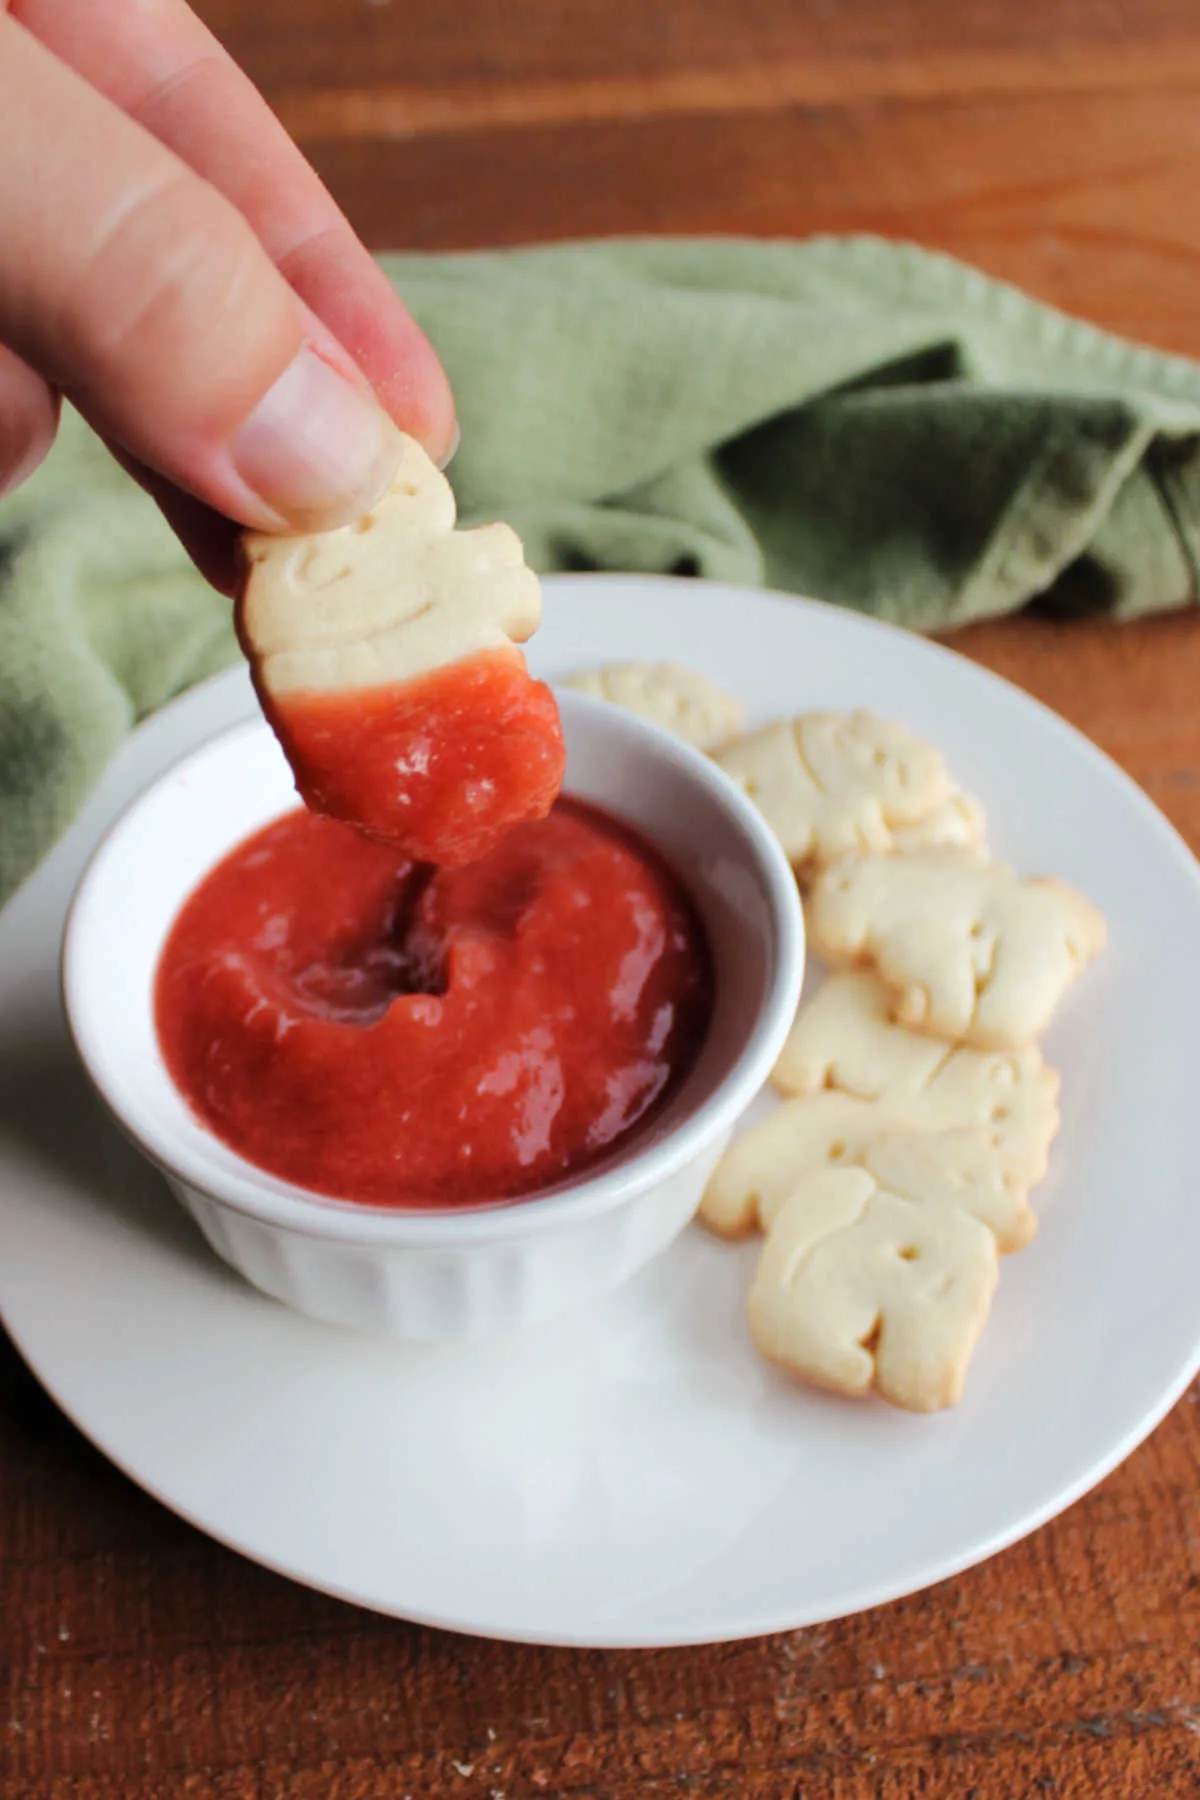 Hand dipping an animal cracker into the bowl of pink strawberry rhubarb sauce showing it sticking to the cookie.